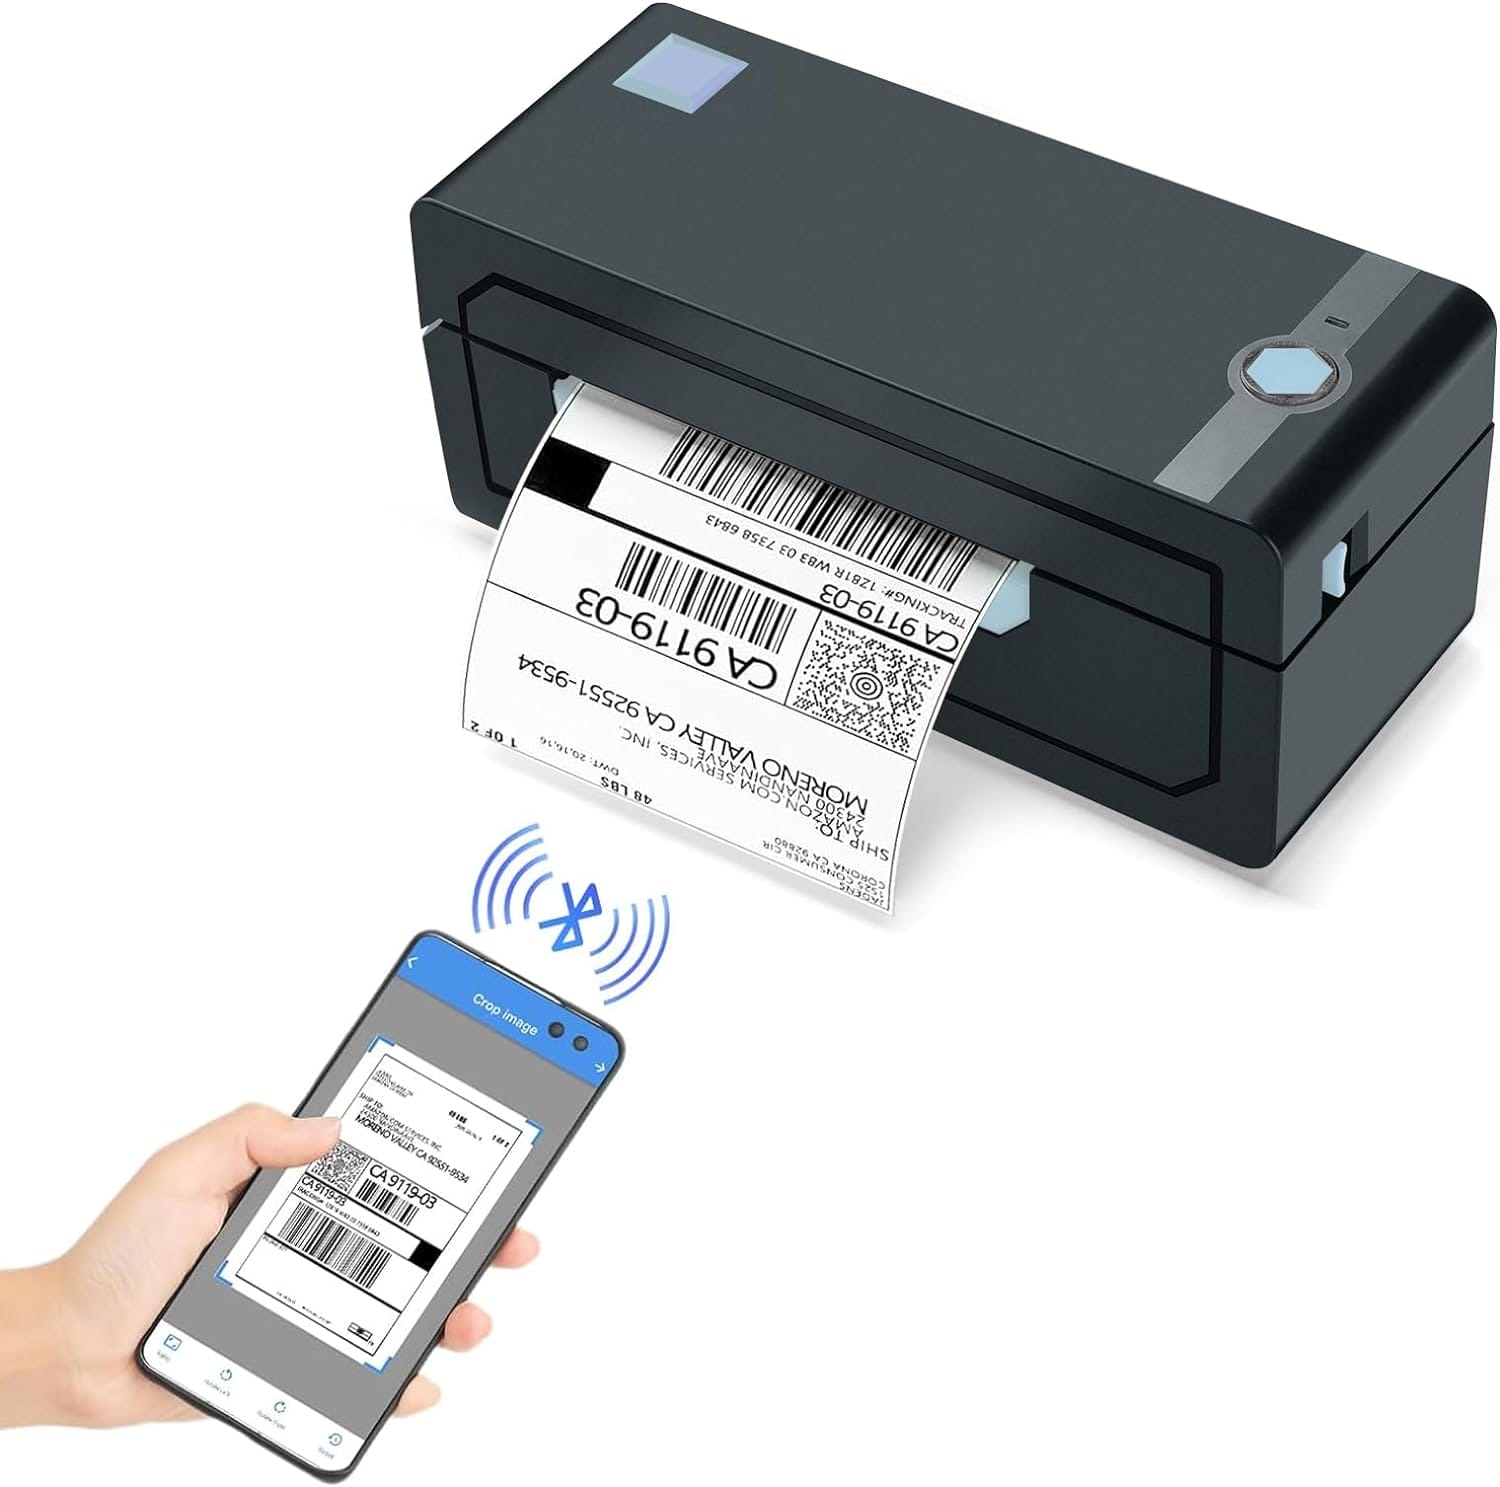 JADENS Bluetooth Thermal Shipping Label Printer – Wireless 4x6 Shipping Label Printer, Compatible with AndroidiPhone and Windows, Widely Used for Ebay, Amazon, Shopify, Etsy, USPS